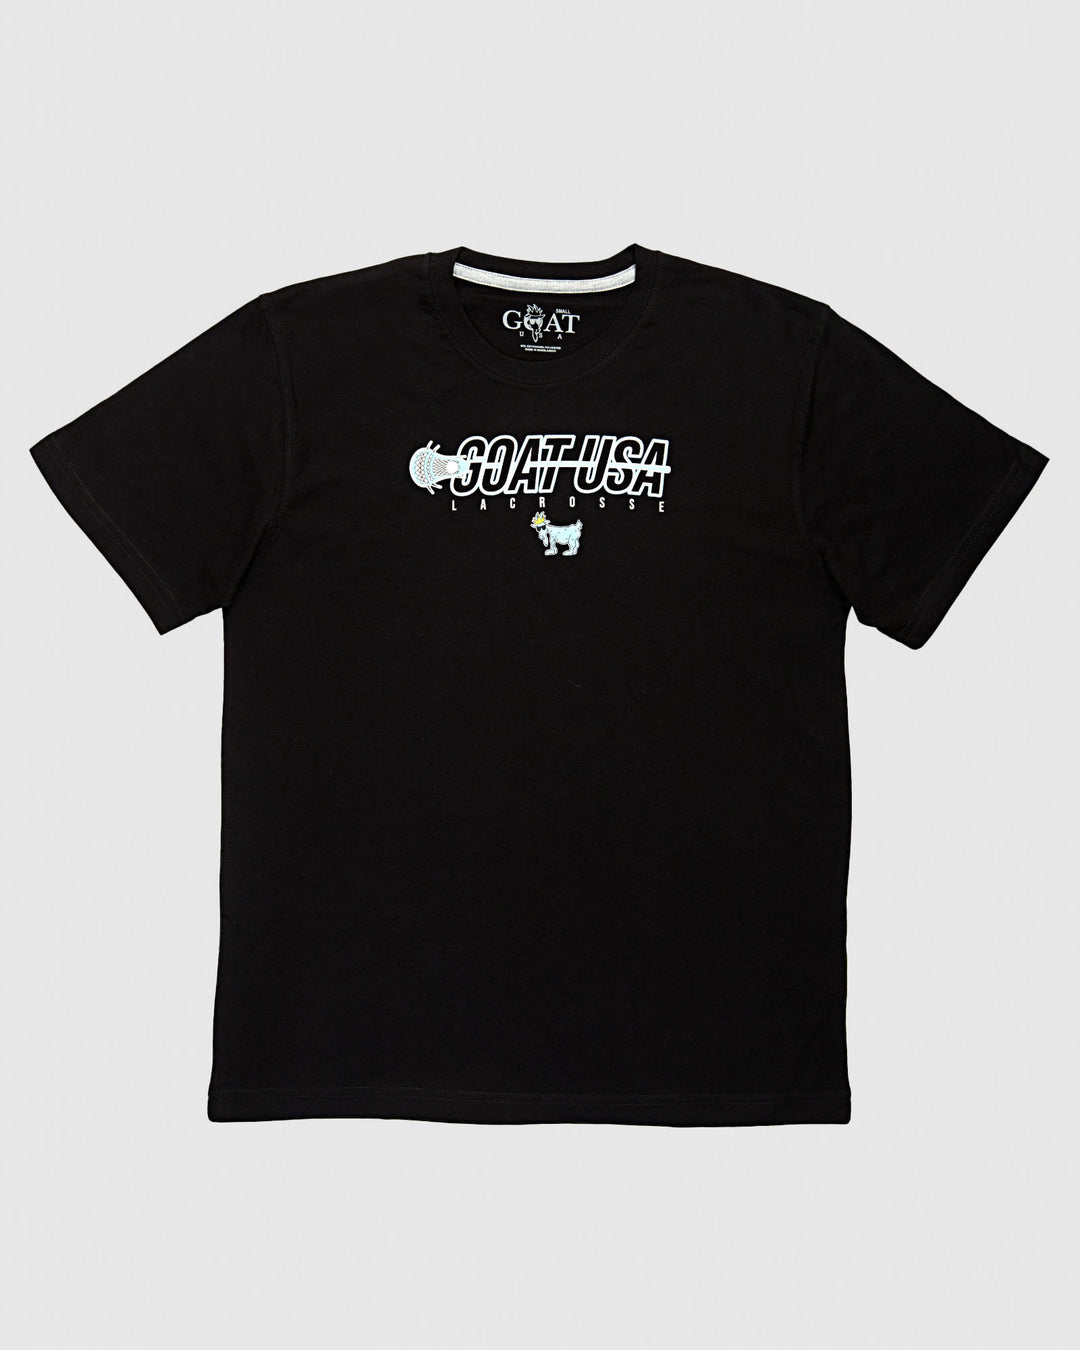 Black shirt with lacrosse stick that goes through the wording "GOAT USA"#color_black